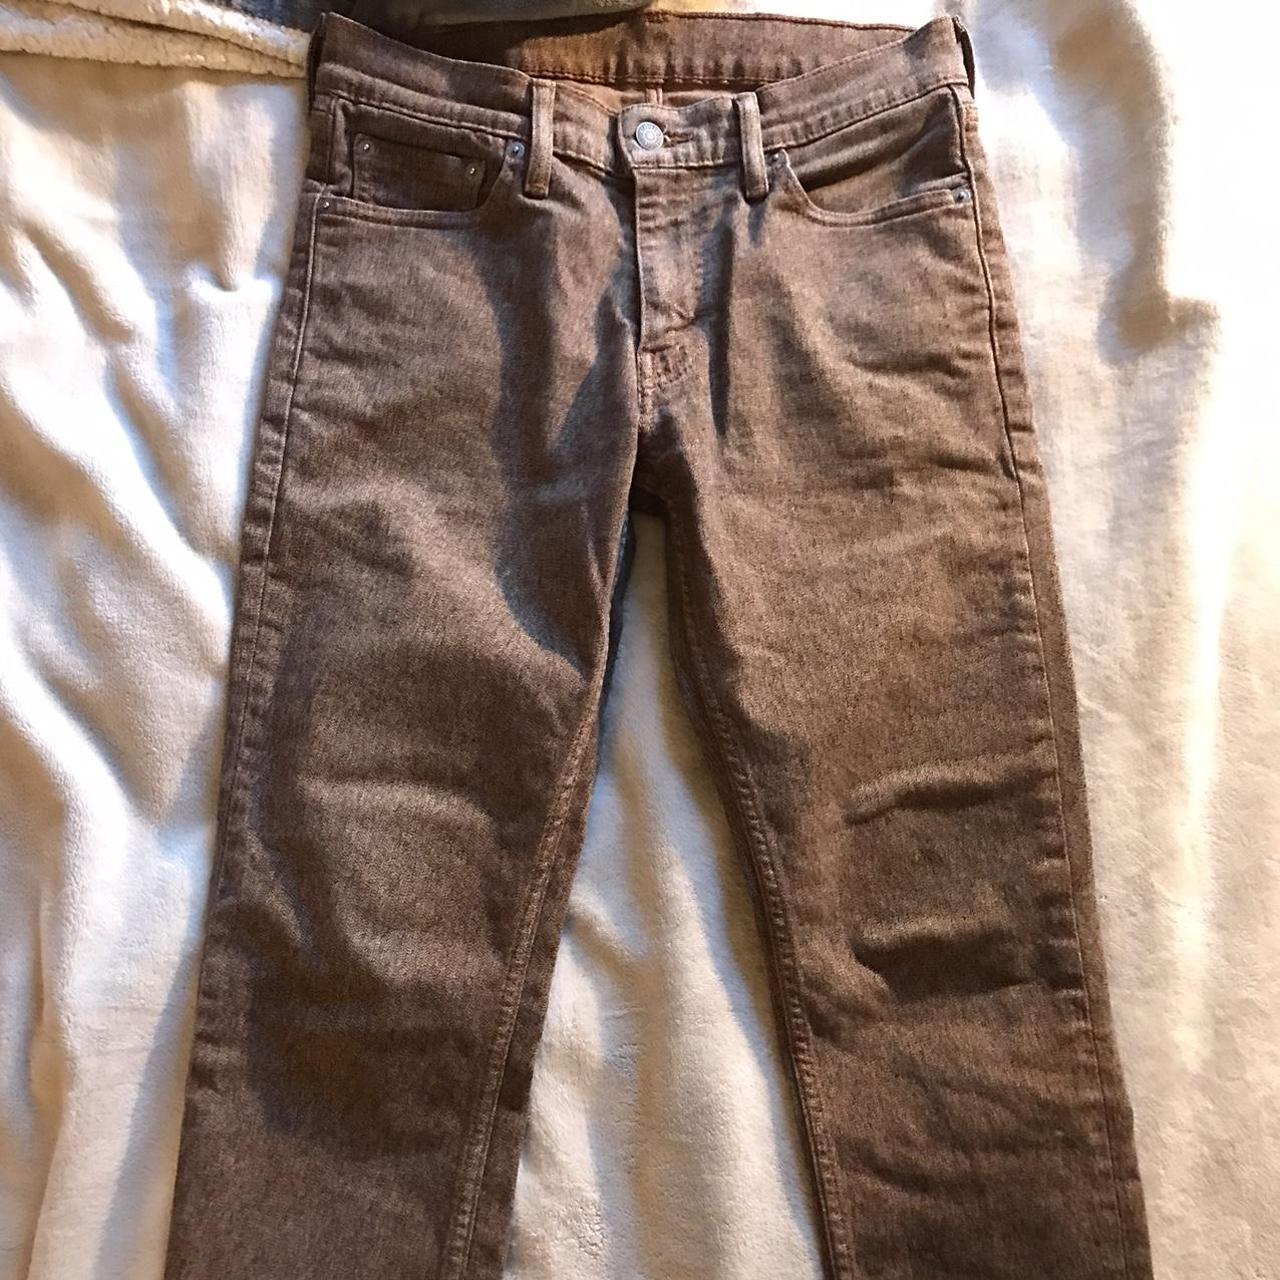 Levi’s Brown Patterned Jeans Barely worn and snug fit - Depop